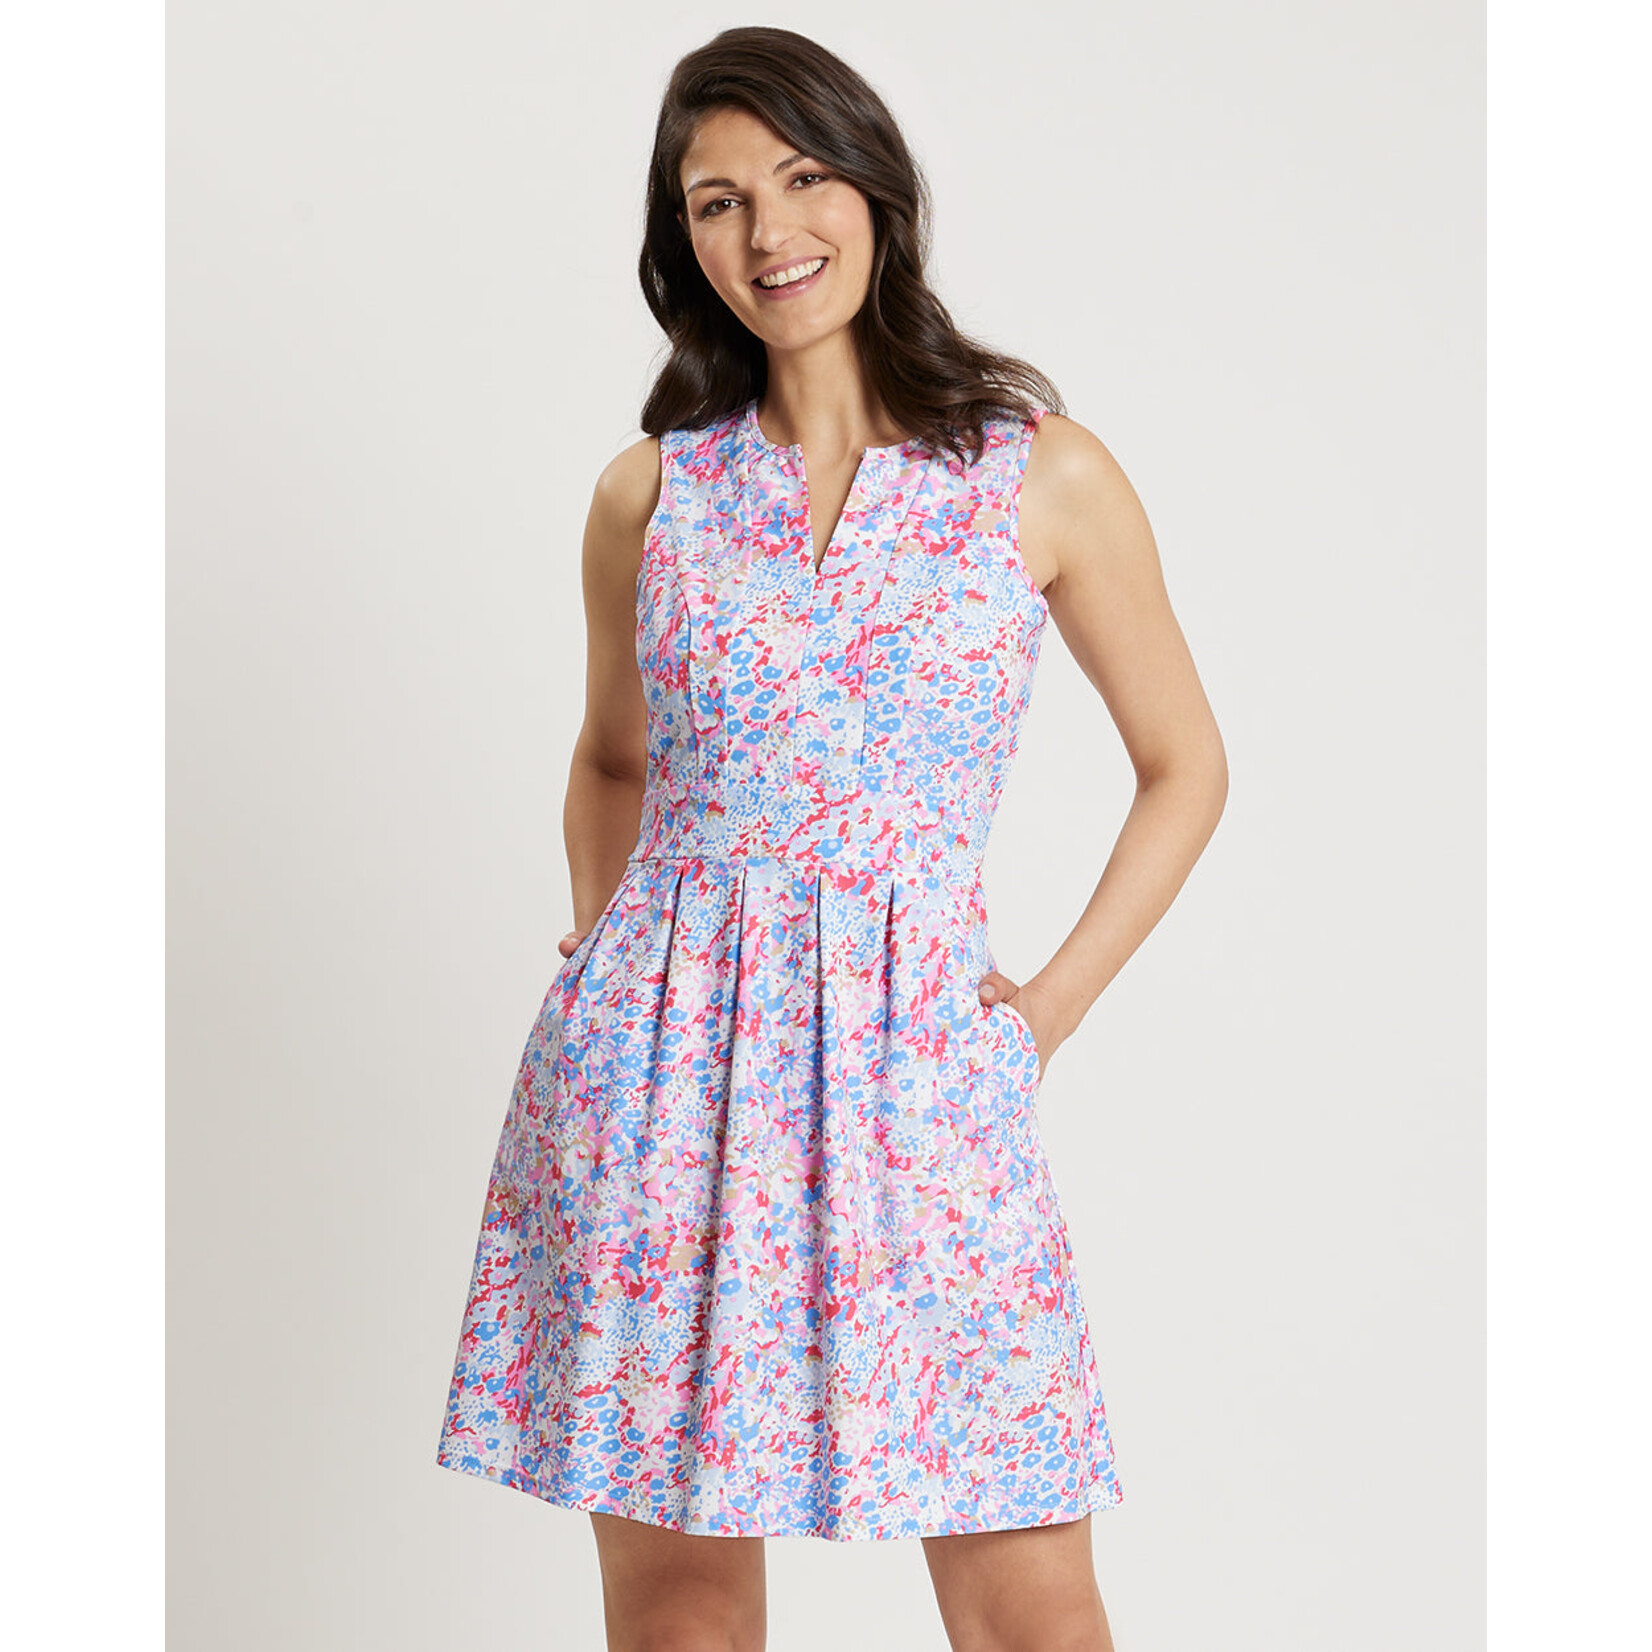 Jude Connally Julie Dress - Watercolor Floral Periwinkle